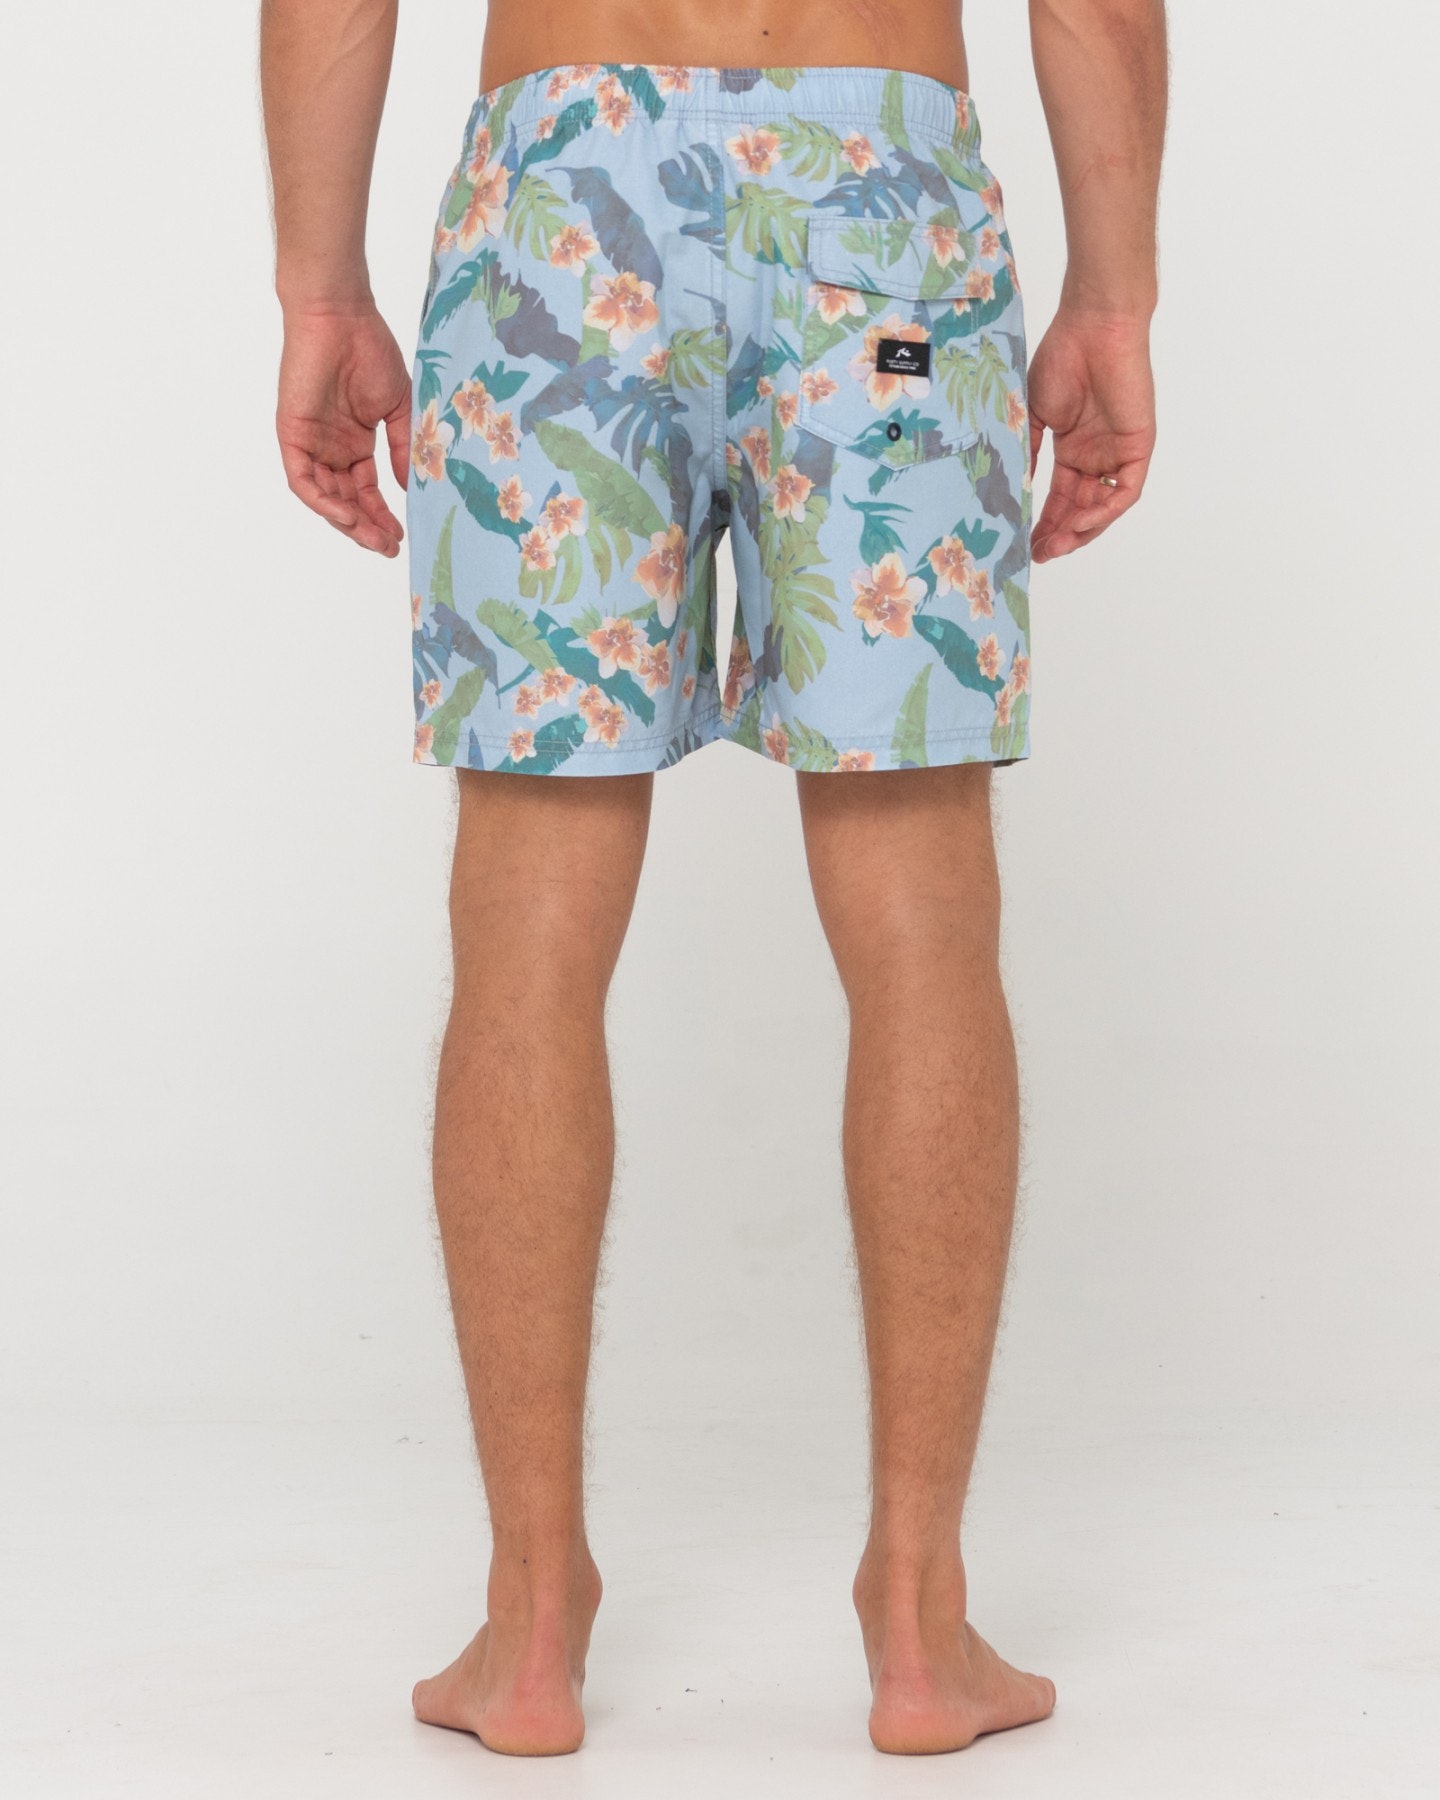 Rusty Selling The Dream Elastic Boardshort - China Blue 1 | SurfStitch